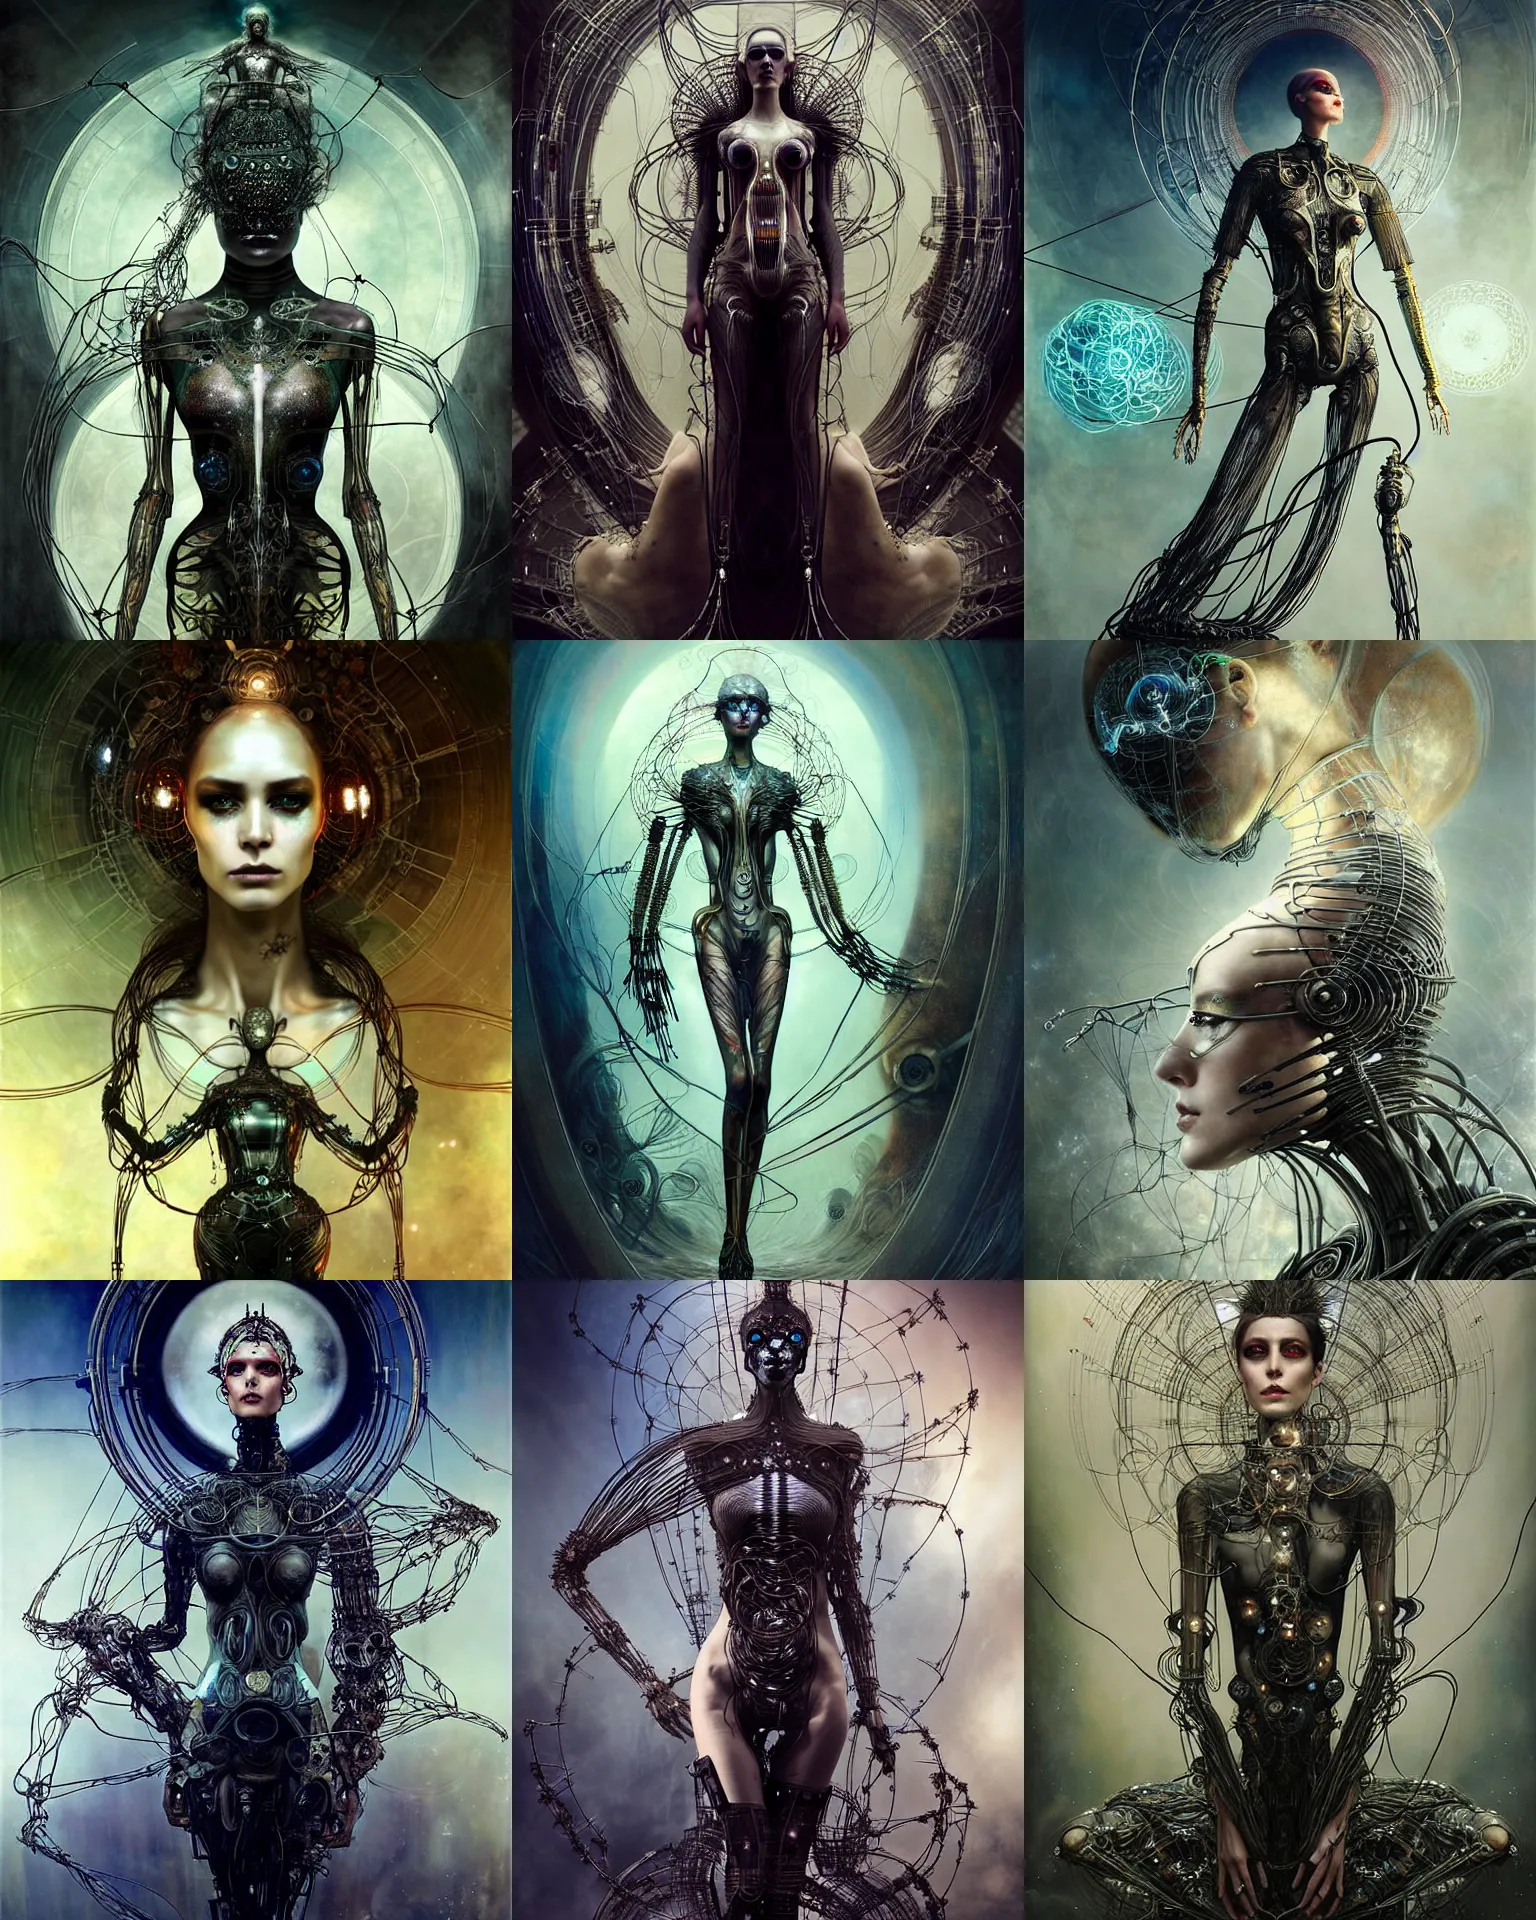 Prompt: karol bak and tom bagshaw and bastien lecouffe - deharme full body character portrait of a supermodel as the borg queen of parasitic glitchcore rebirth, floating in a powerful zen state, beautiful and ominous, wearing combination of mecha and bodysuit made of wires and etched ceramic, machinery enveloping nature in the background, scifi character render